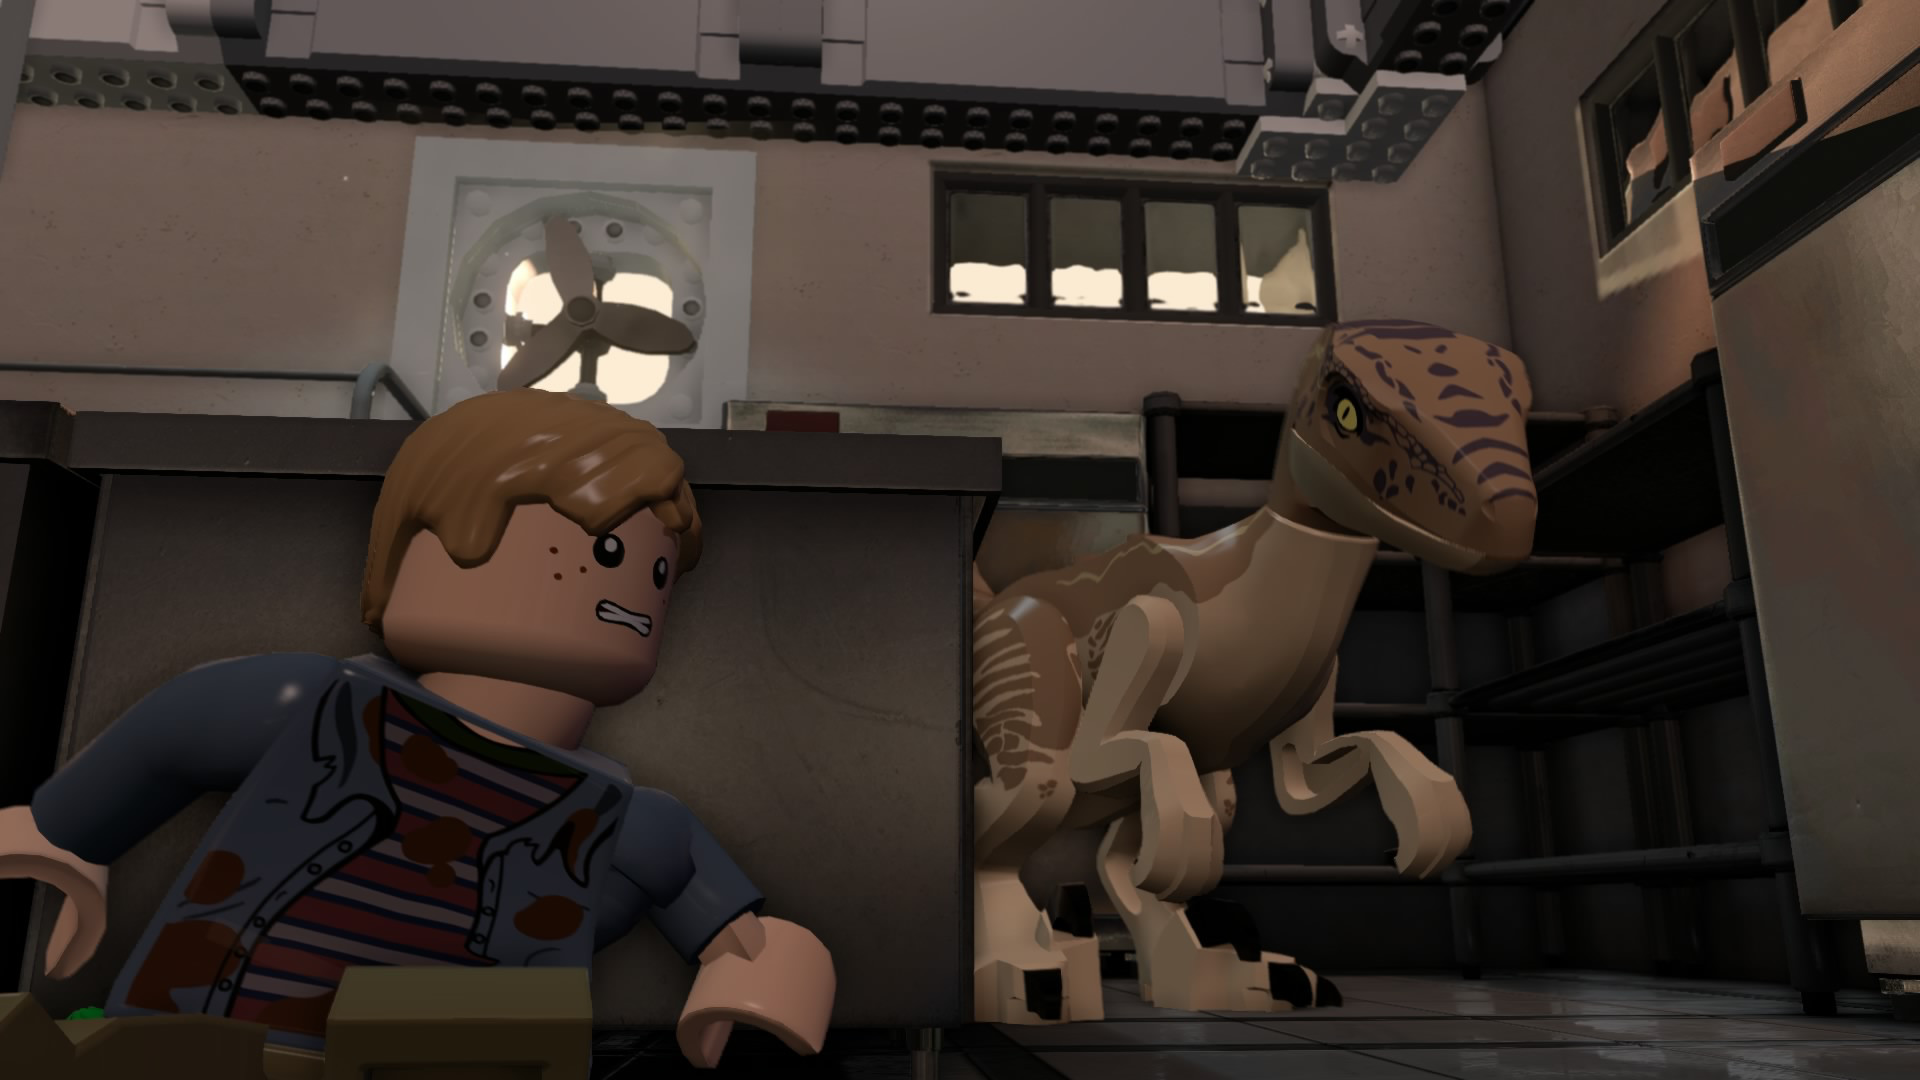 LEGO Jurassic World announced for Switch